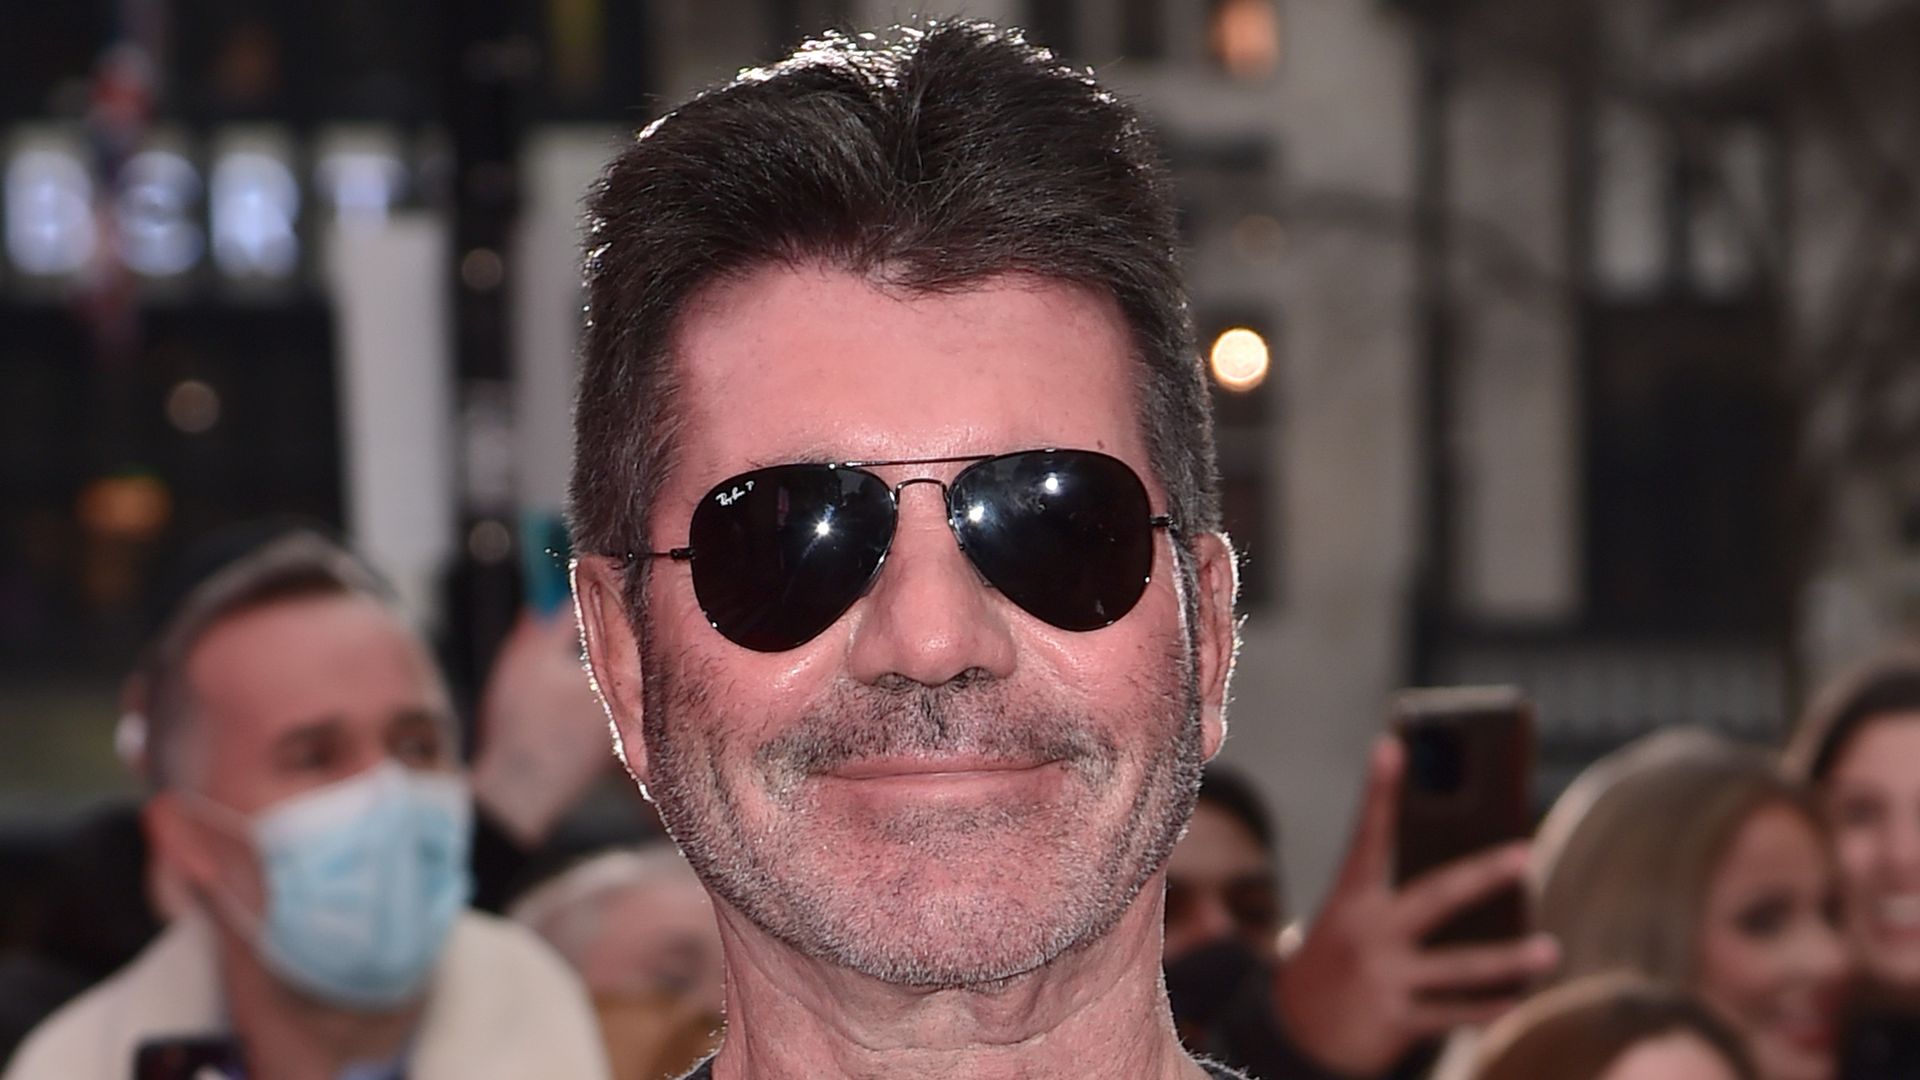 Simon Cowell's rarely-seen son Eric, 10, steals the show in BGT behind-the-scenes photo